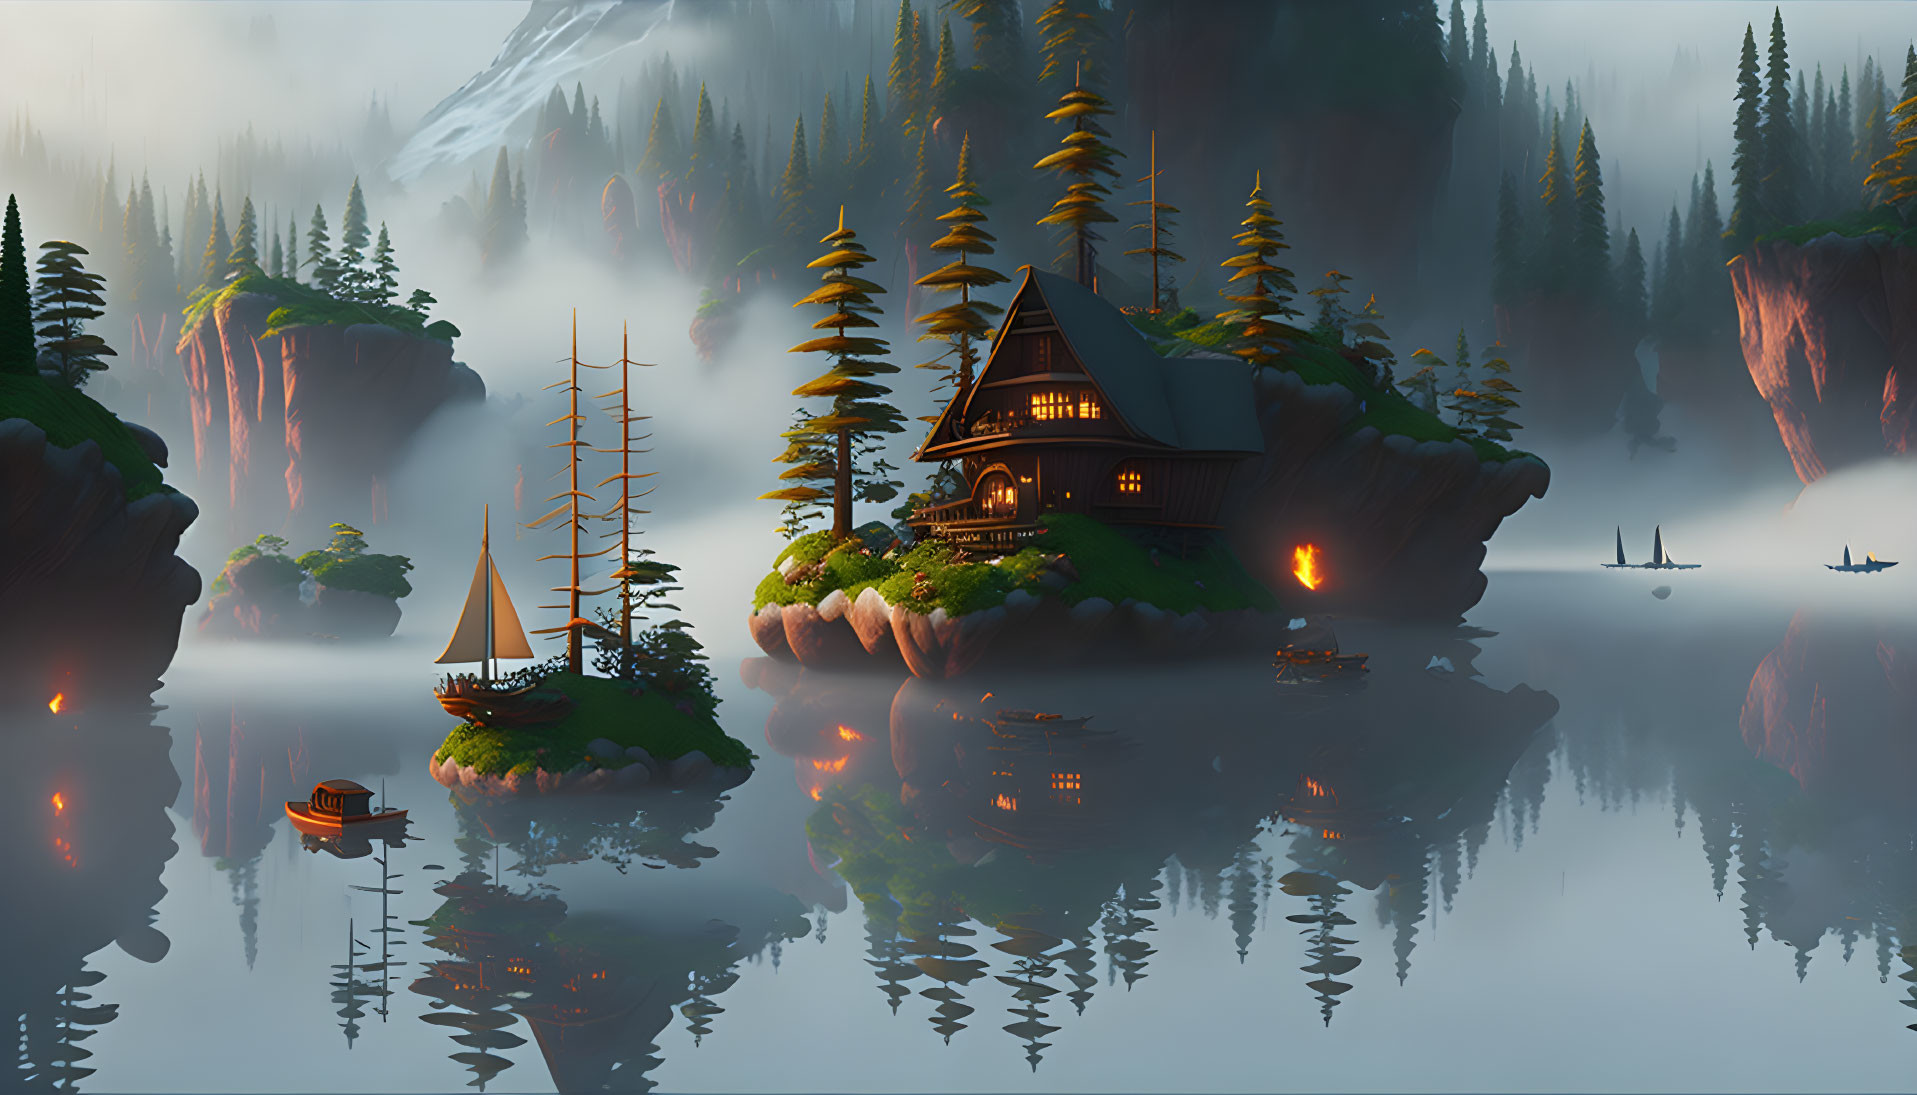 Tranquil lakeside cabin on pine tree islet with misty mountains and boats at dusk or